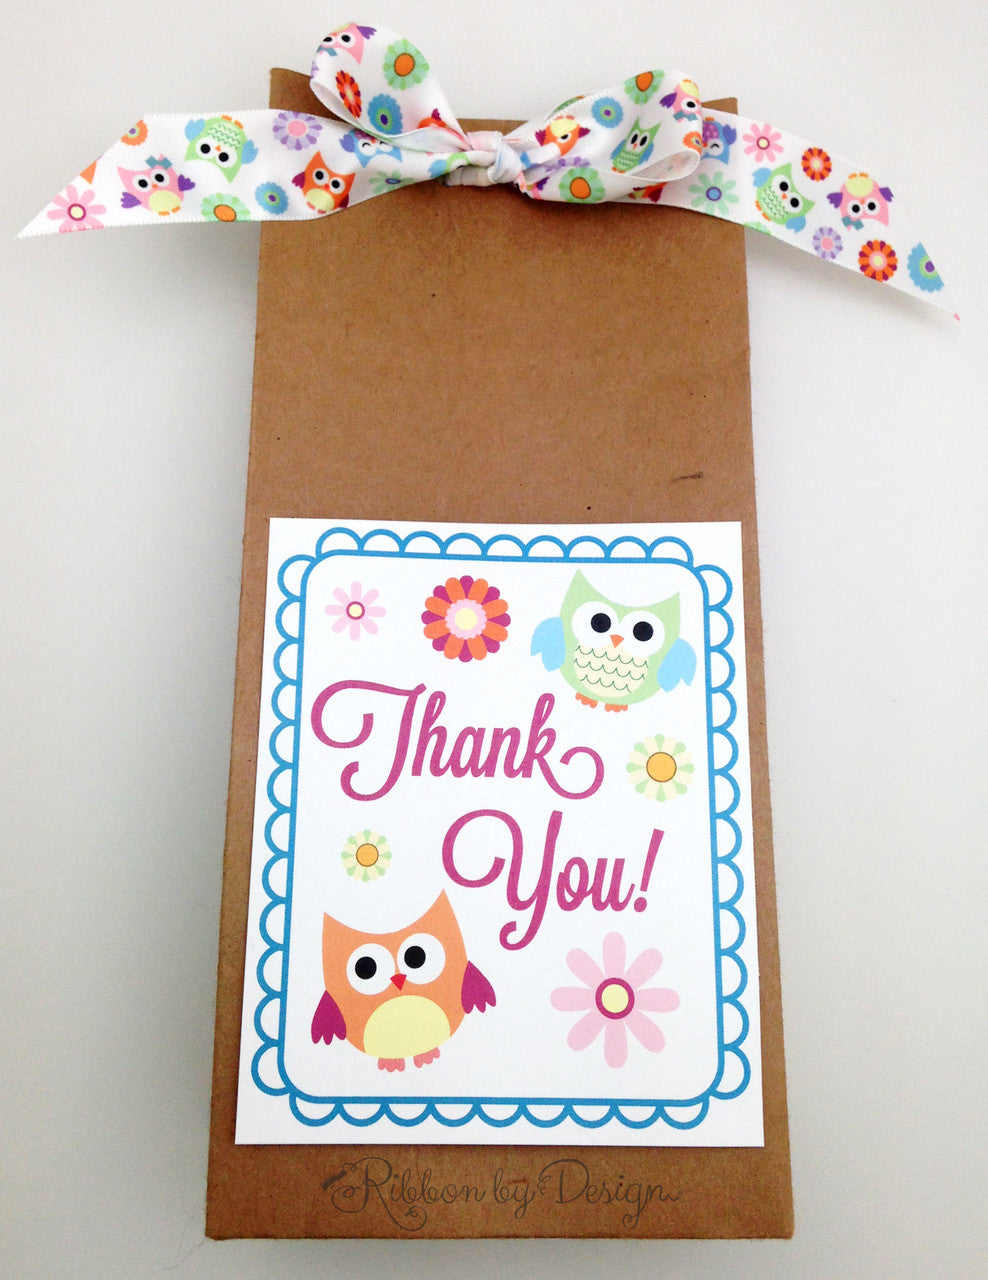 An owl themed baby shower or party needs this little ribbon to tie the favor gifts!